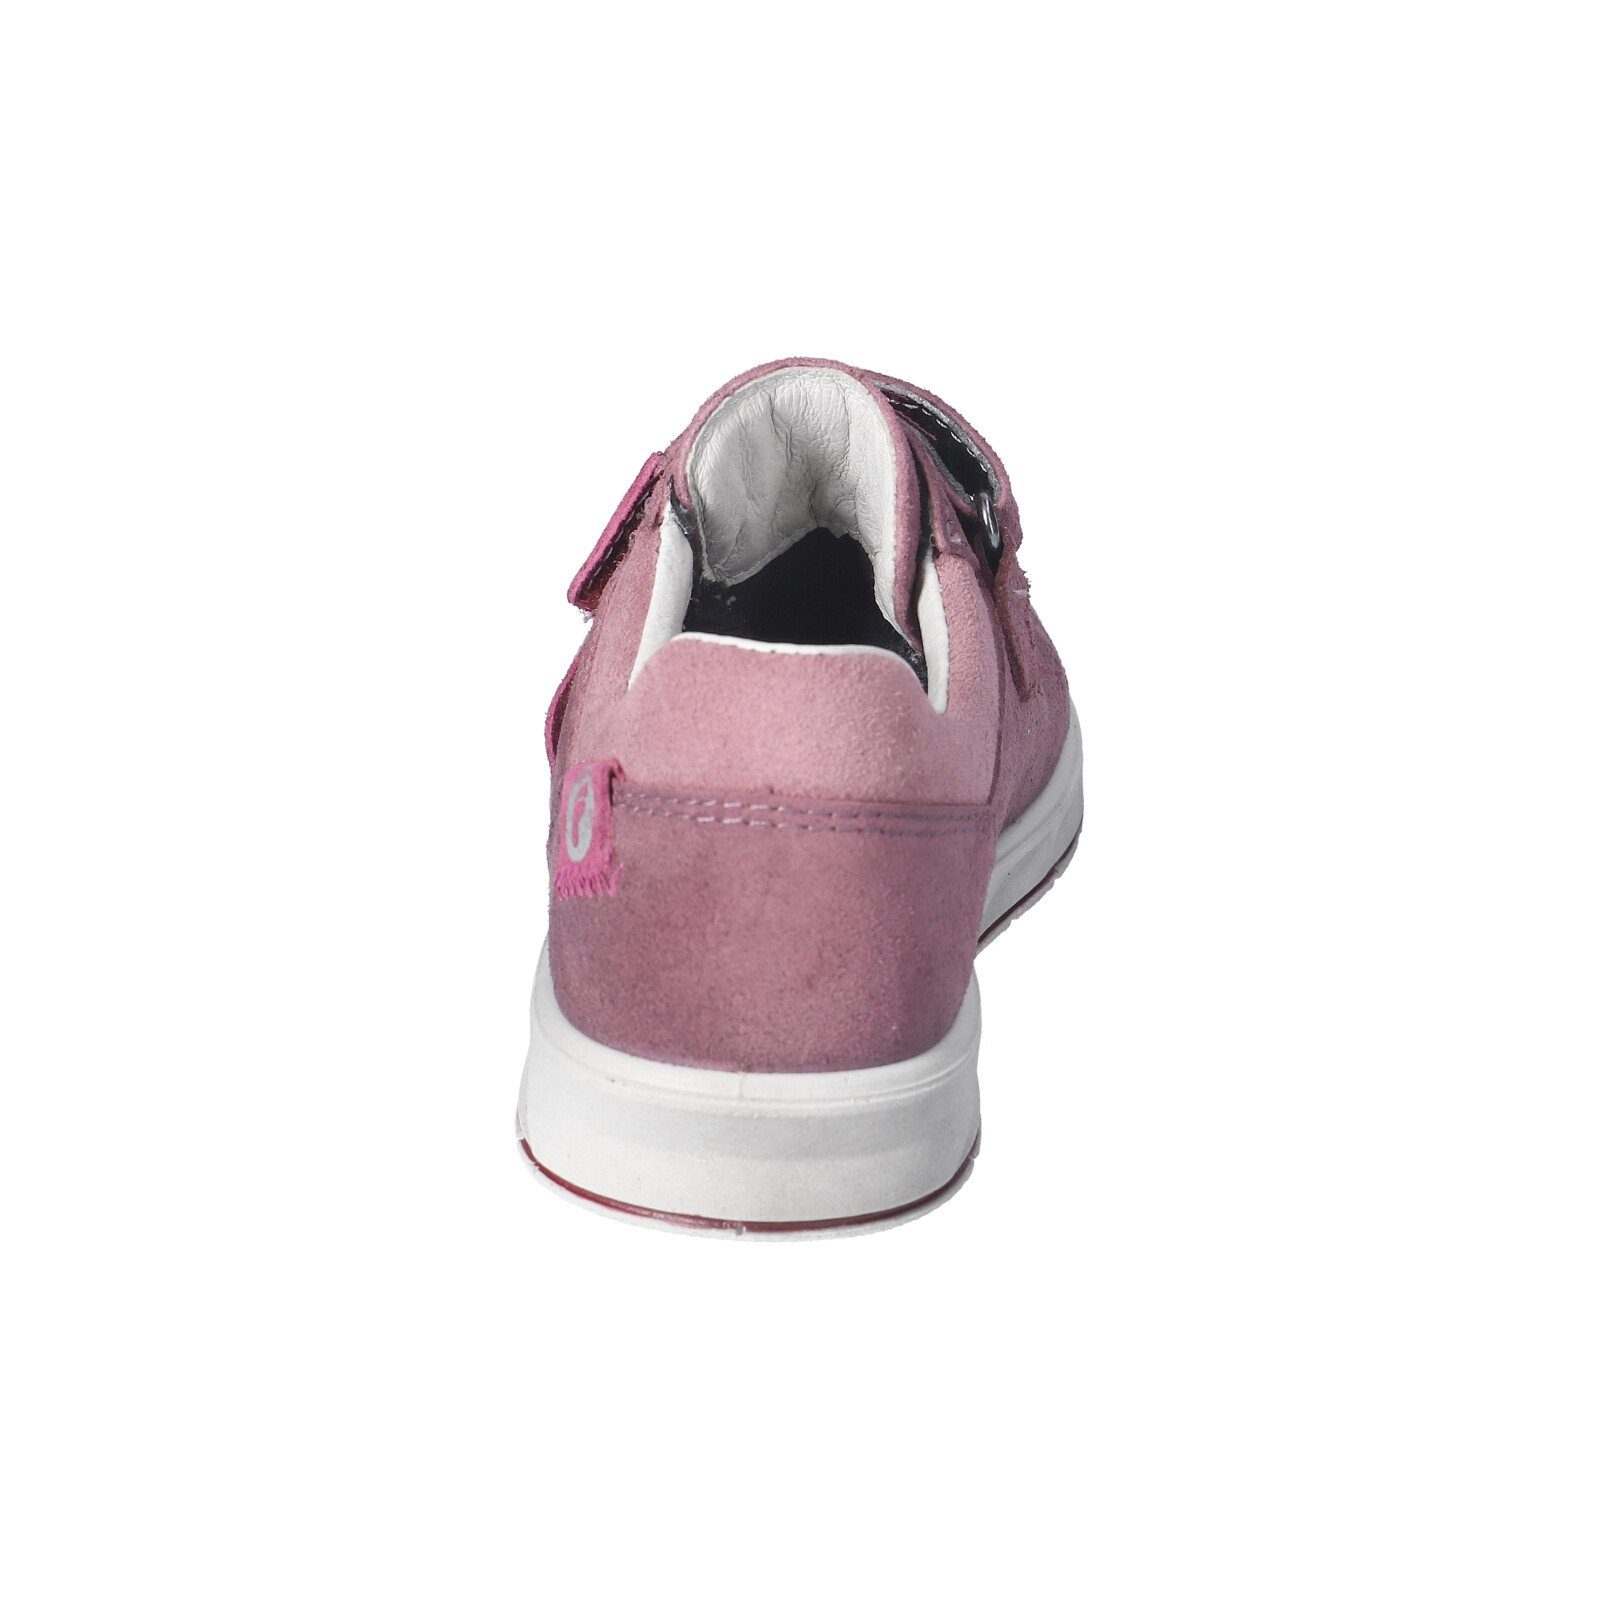 (370) Ricosta pflaume/sucre Sneaker